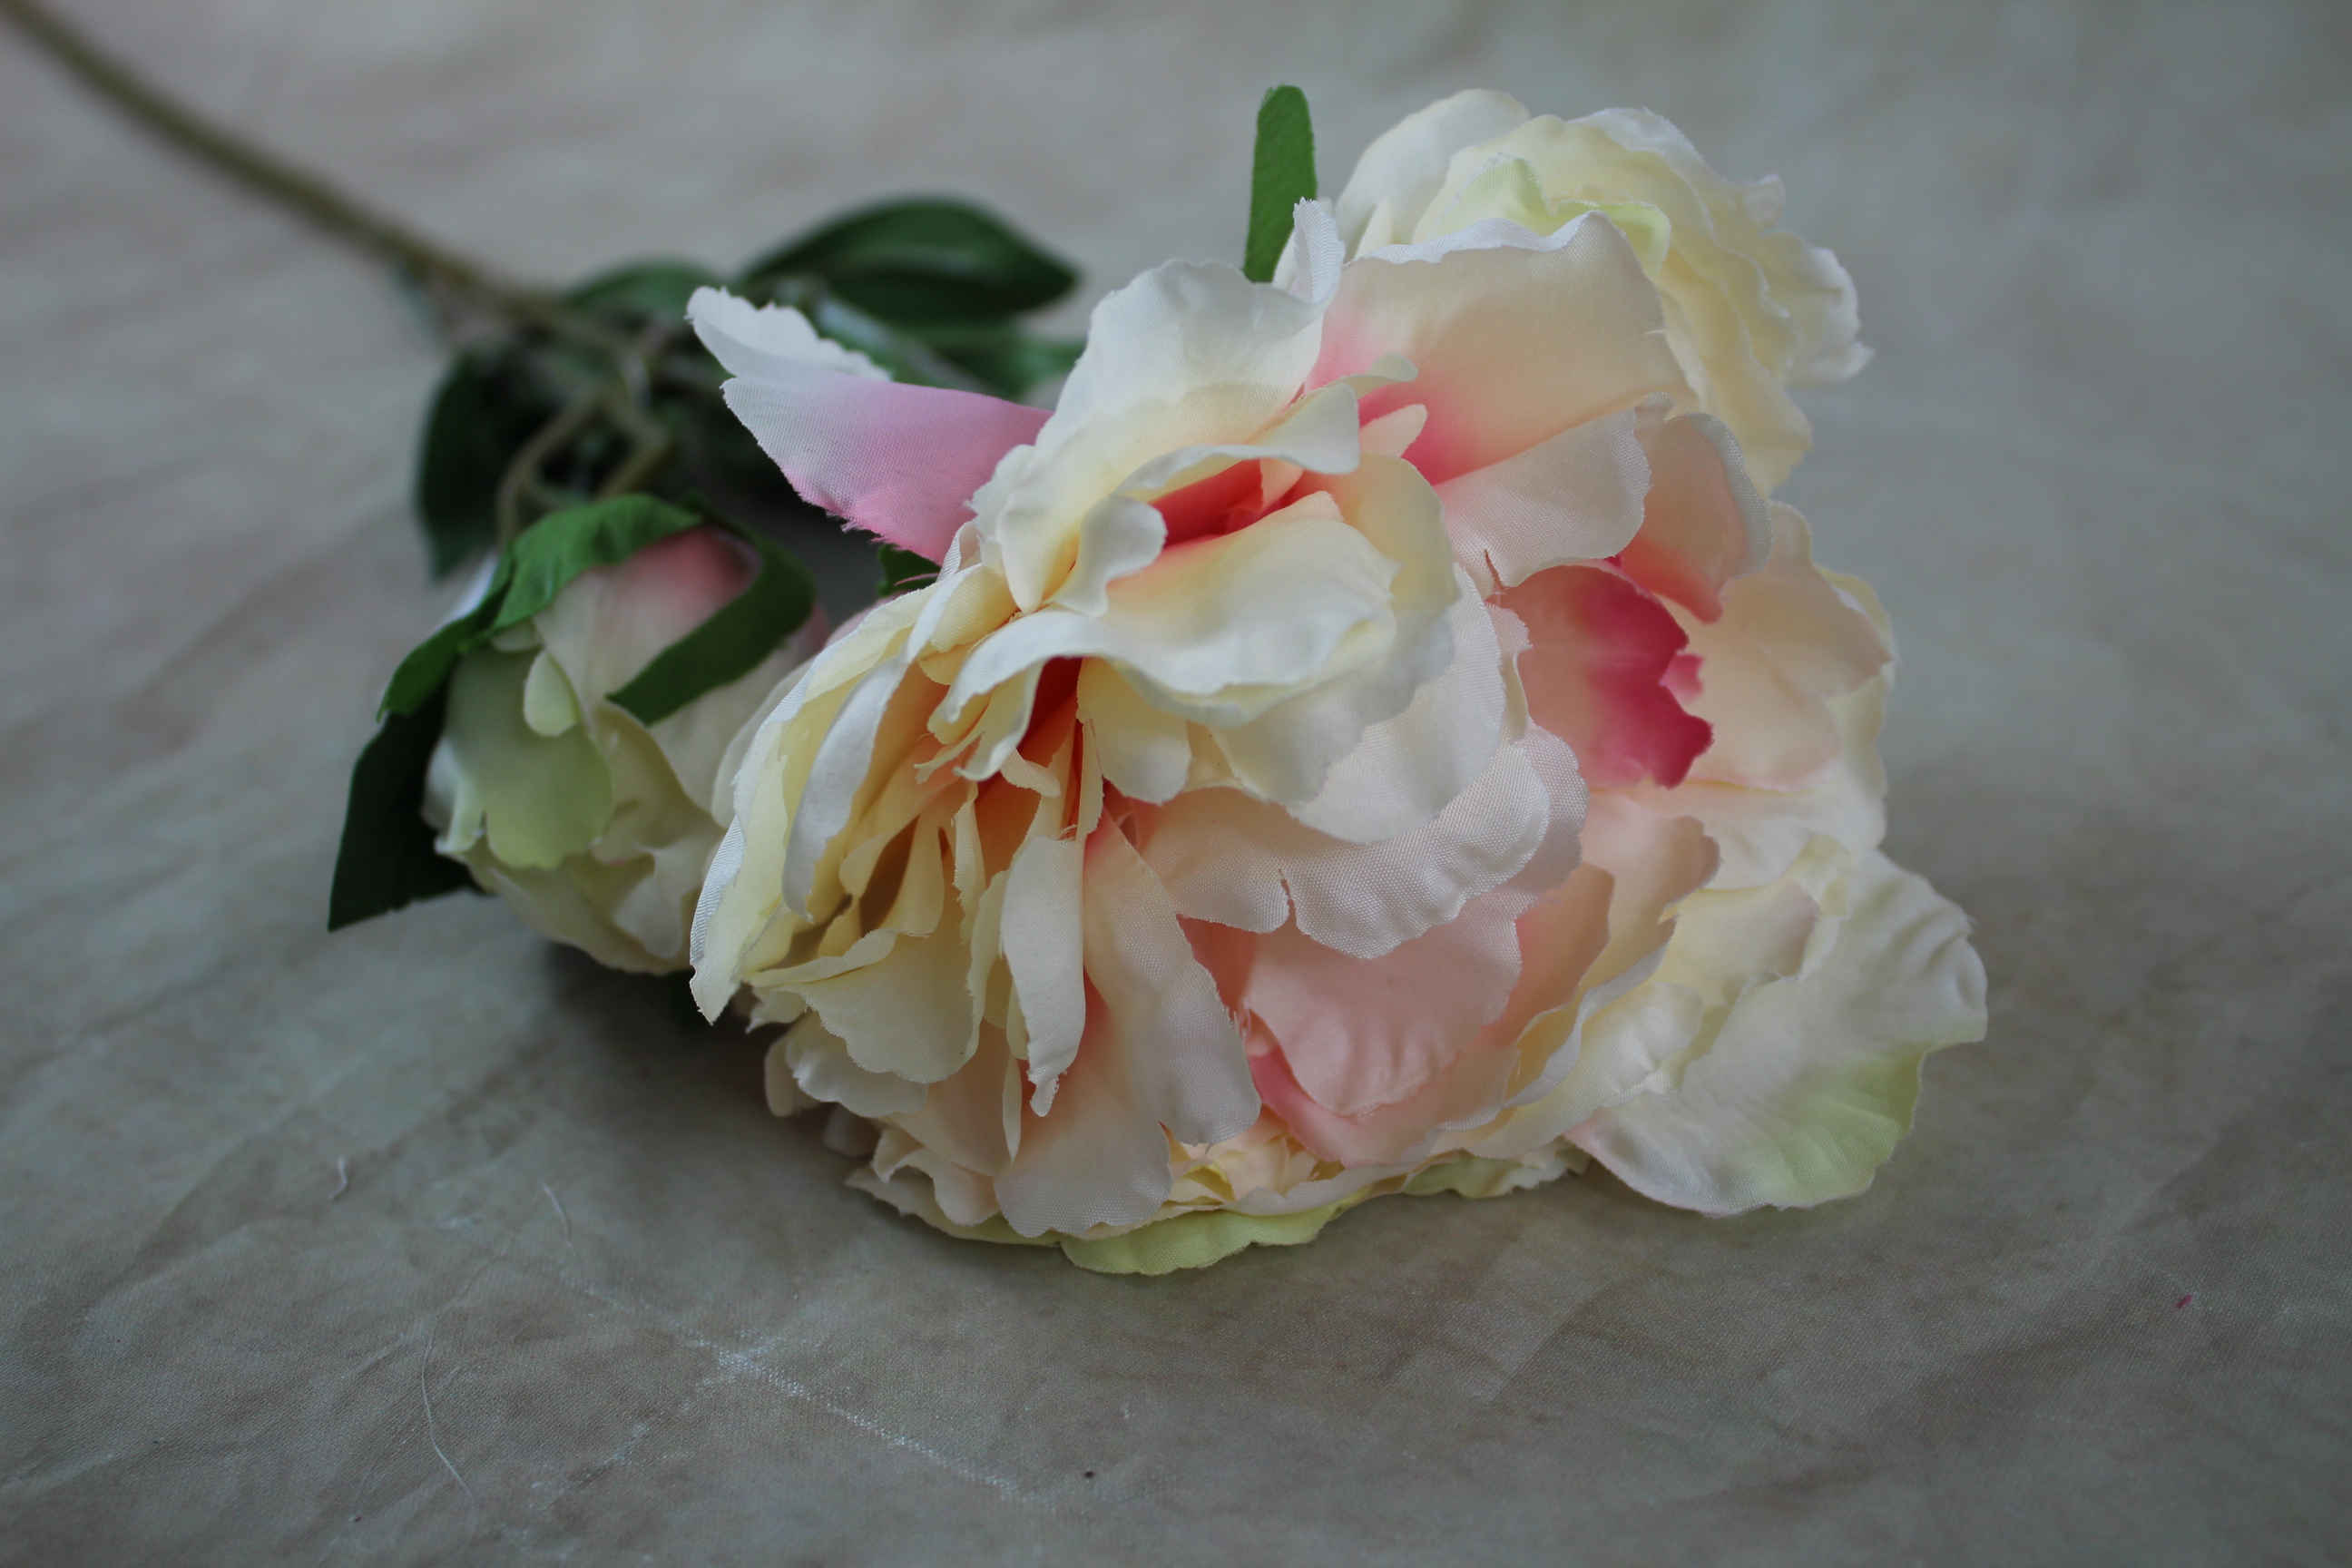 24 x 14cm blooming peony & bud with leaves on 70 cm stem